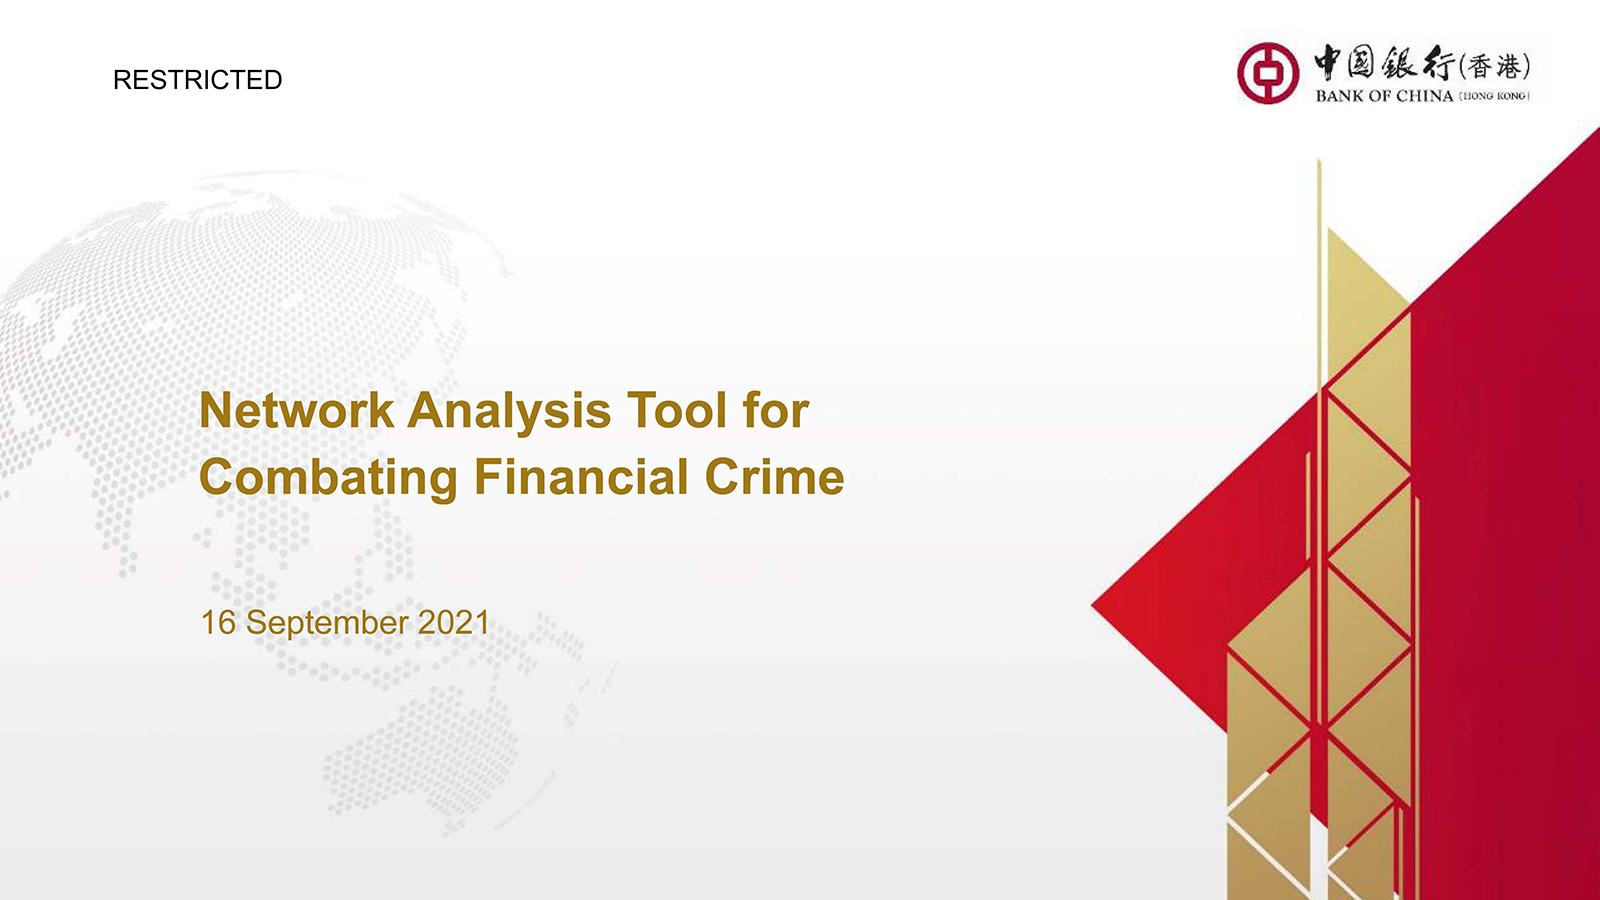 Network Analysis Tool for Combating Financial Crime by BOC